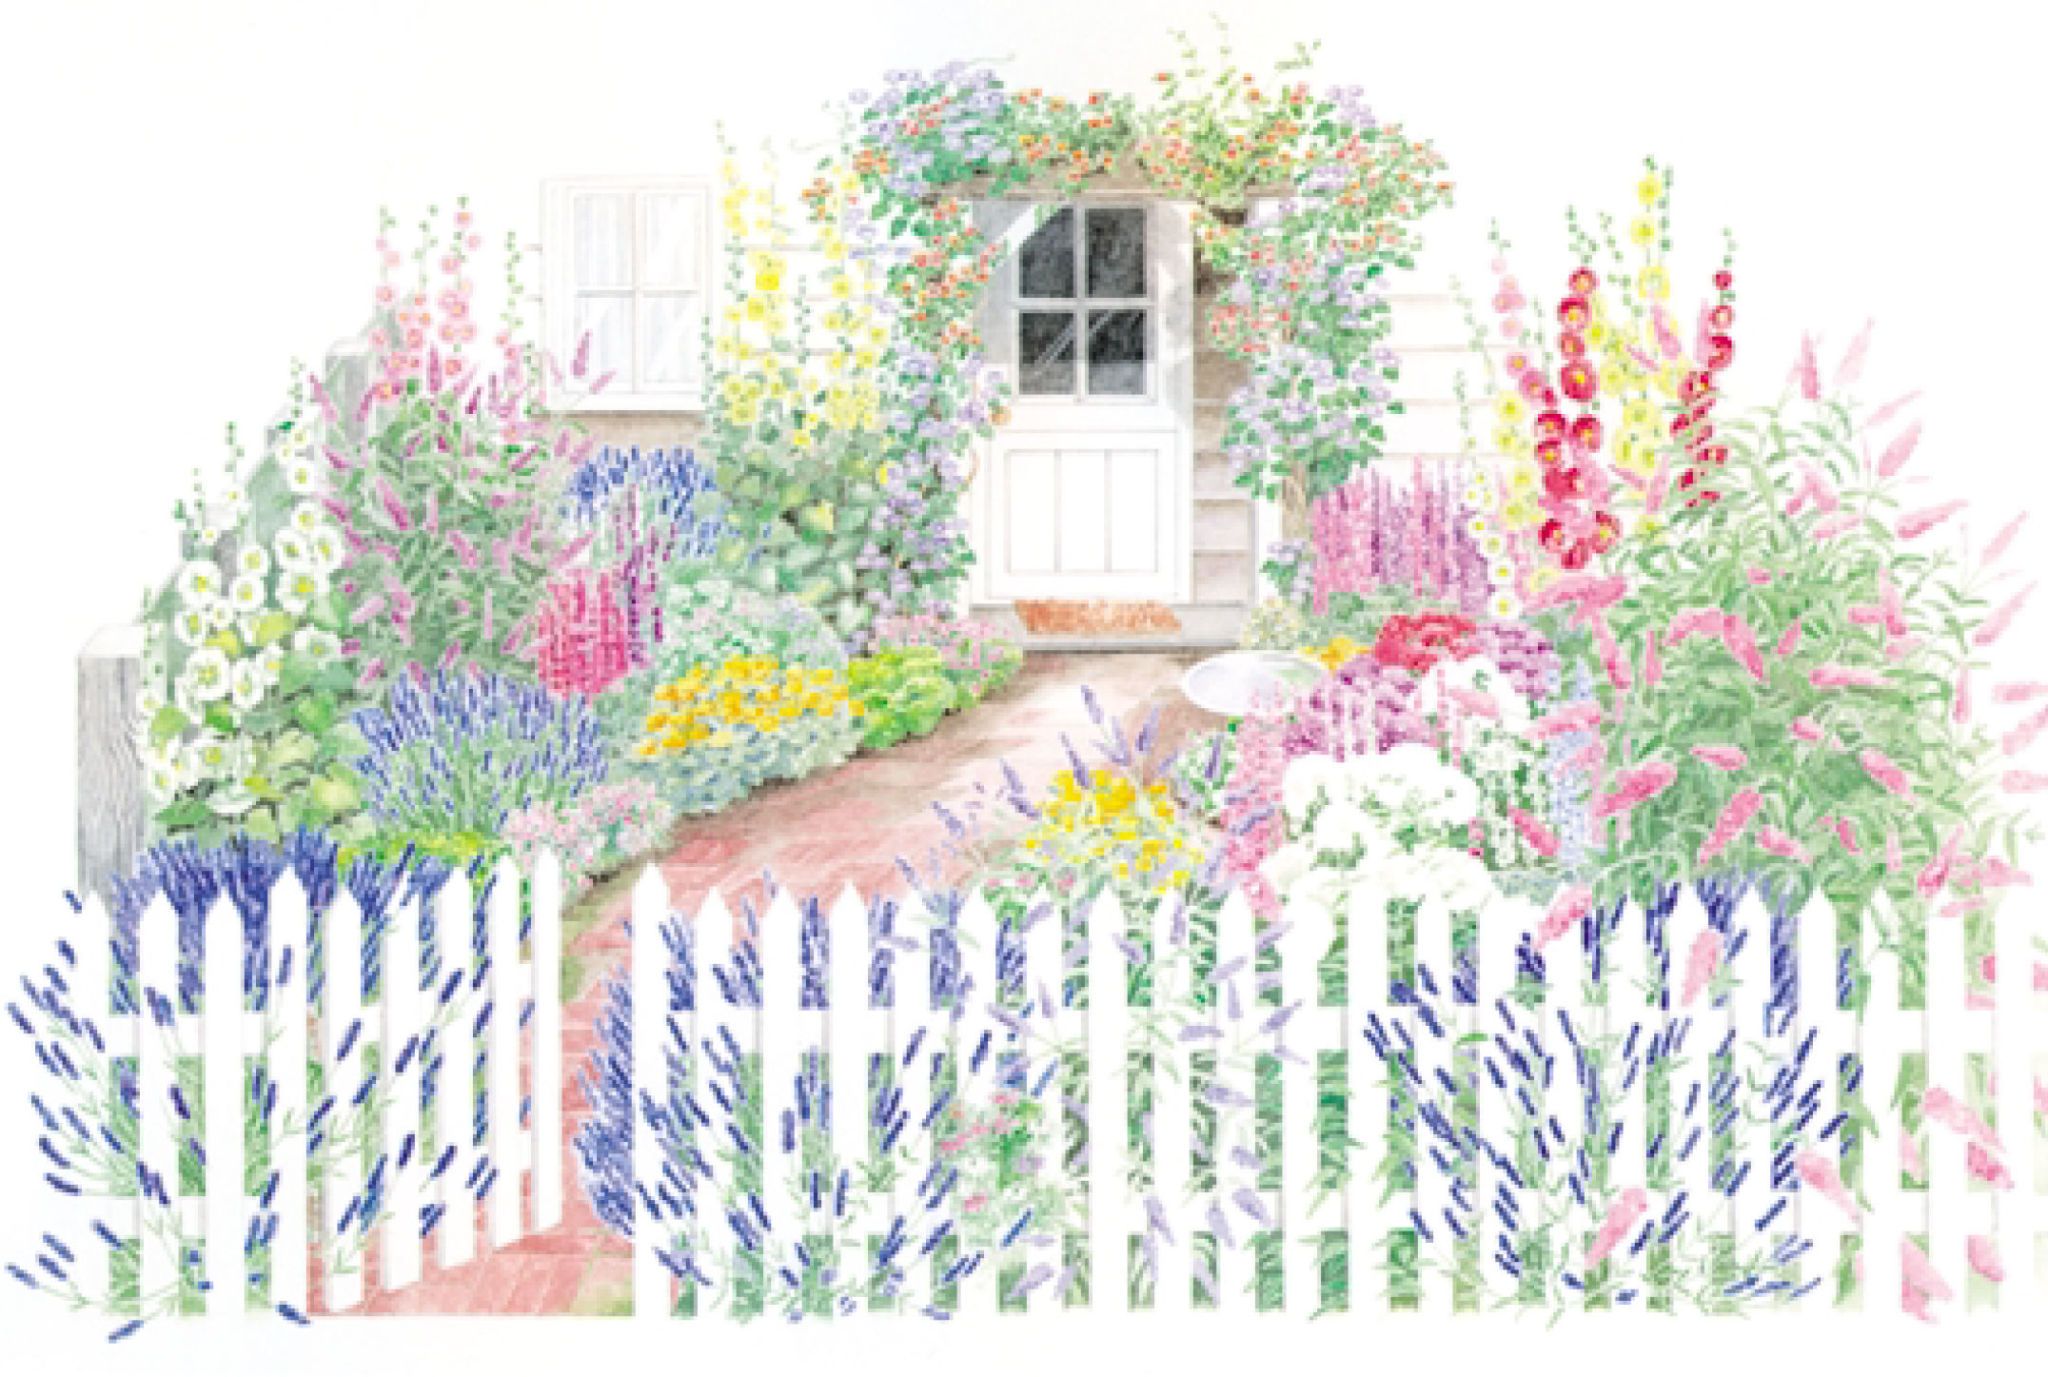 How to Draw a Flower Garden - Easy Tutorial